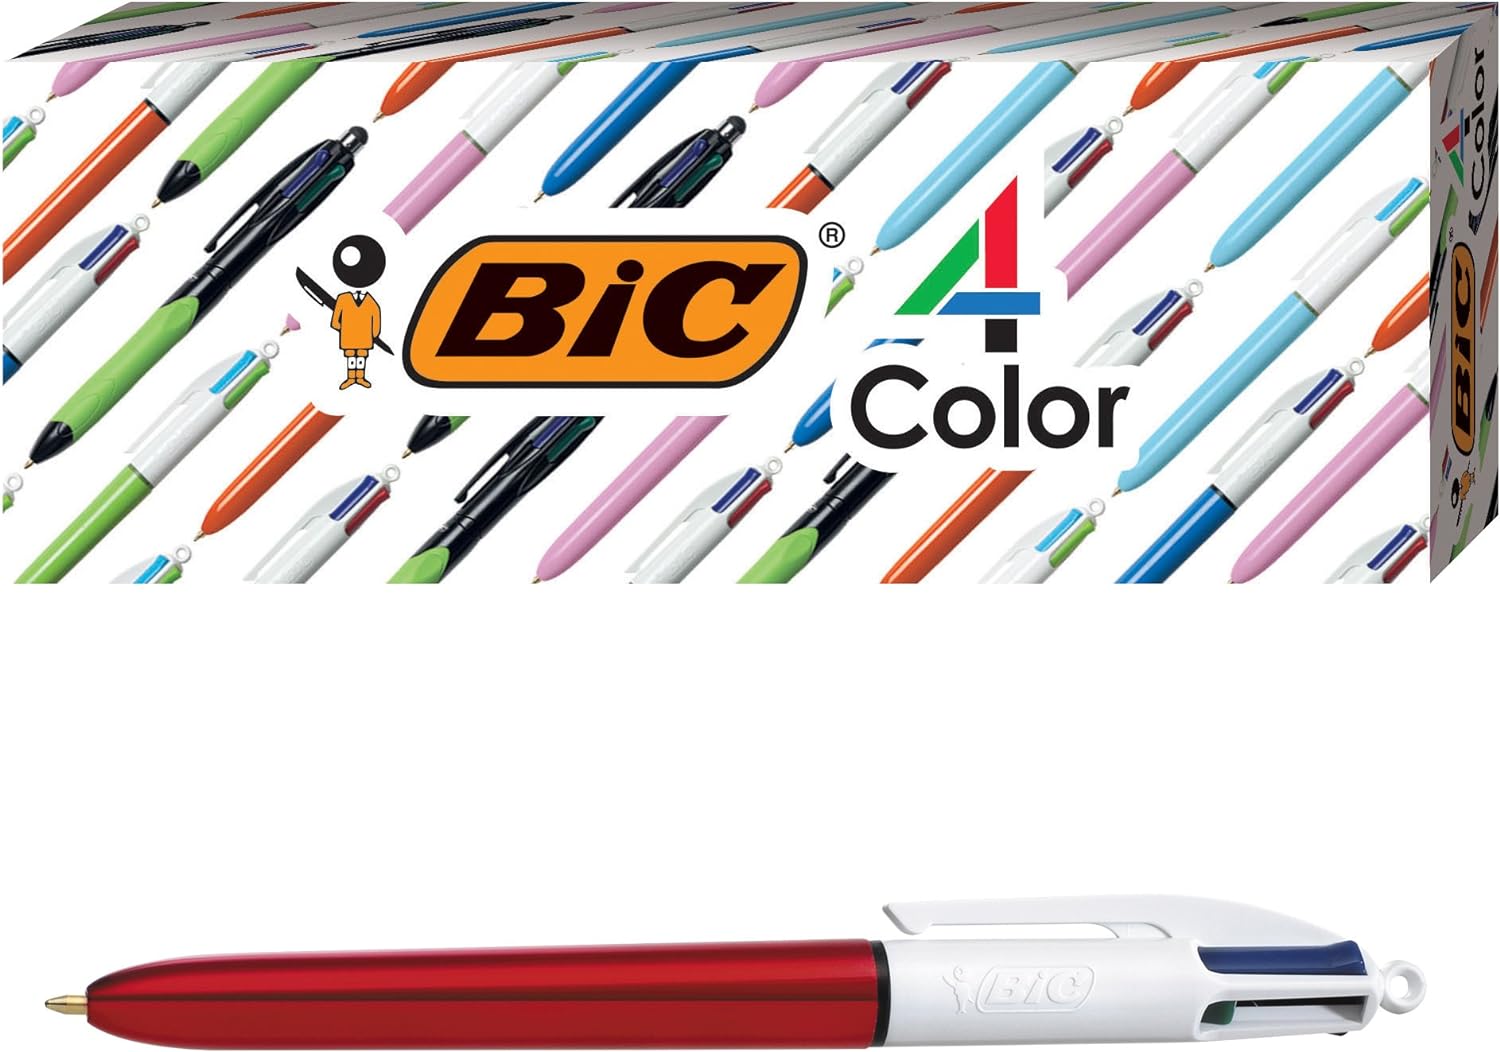 BIC 4-Color Shine Ballpoint Pen, Red Barrel, Medium Point (1.0mm), Assorted Inks, 3-Count